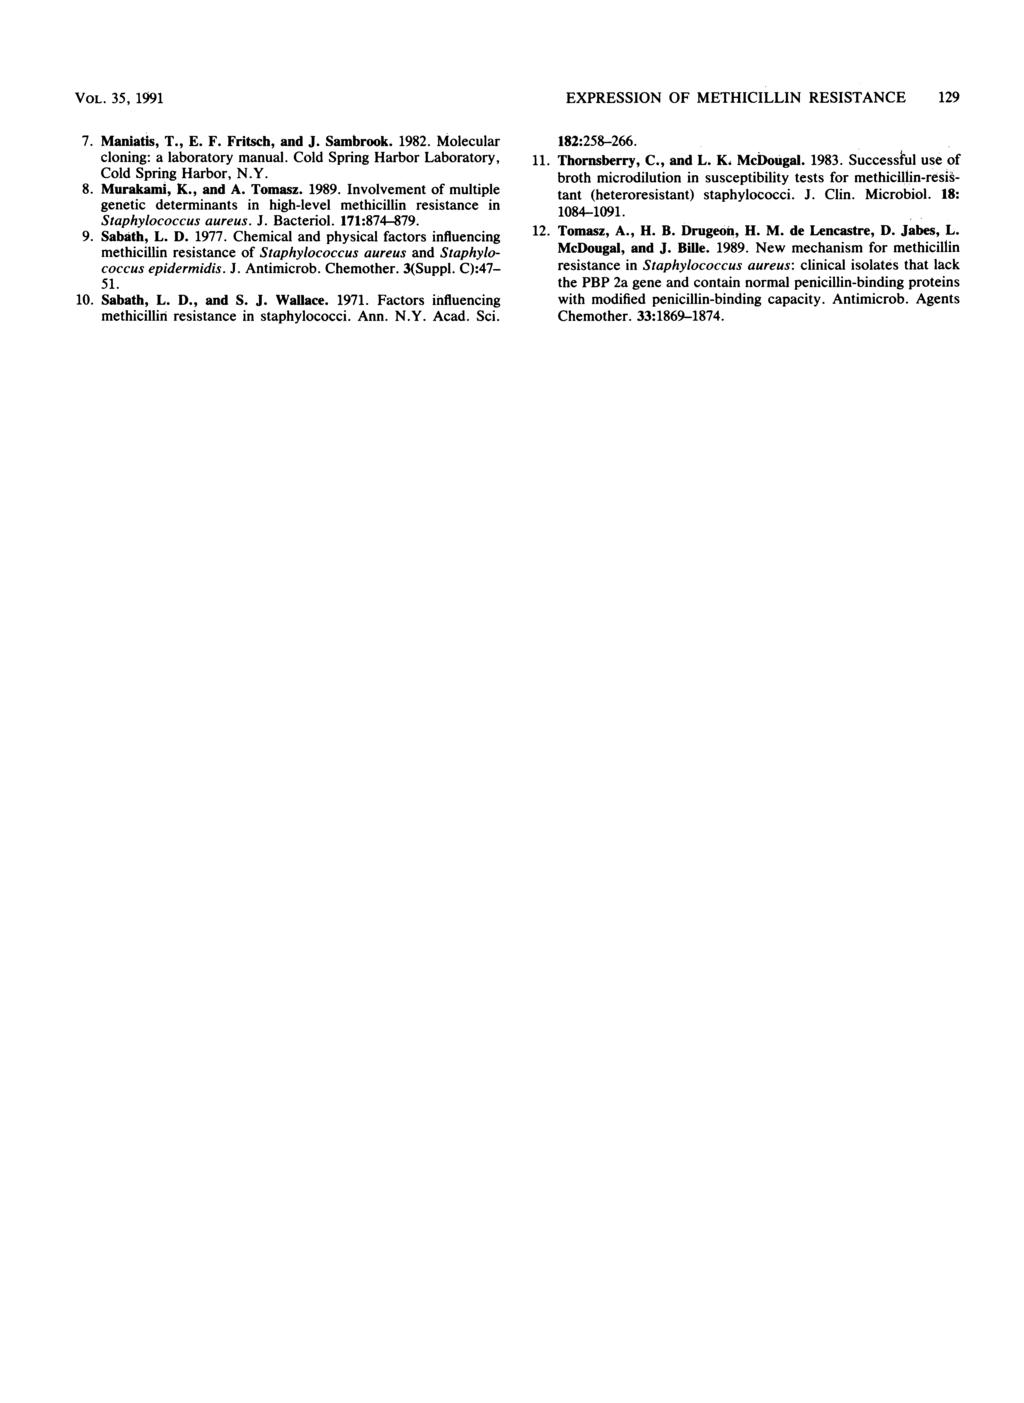 VOL. 35, 1991 EXPRESSION OF METHICILLIN RESISTANCE 129 7. Maniatis, T., E. F. Fritsch, and J. Sambrook. 1982. Molecular cloning: a laboratory manual.